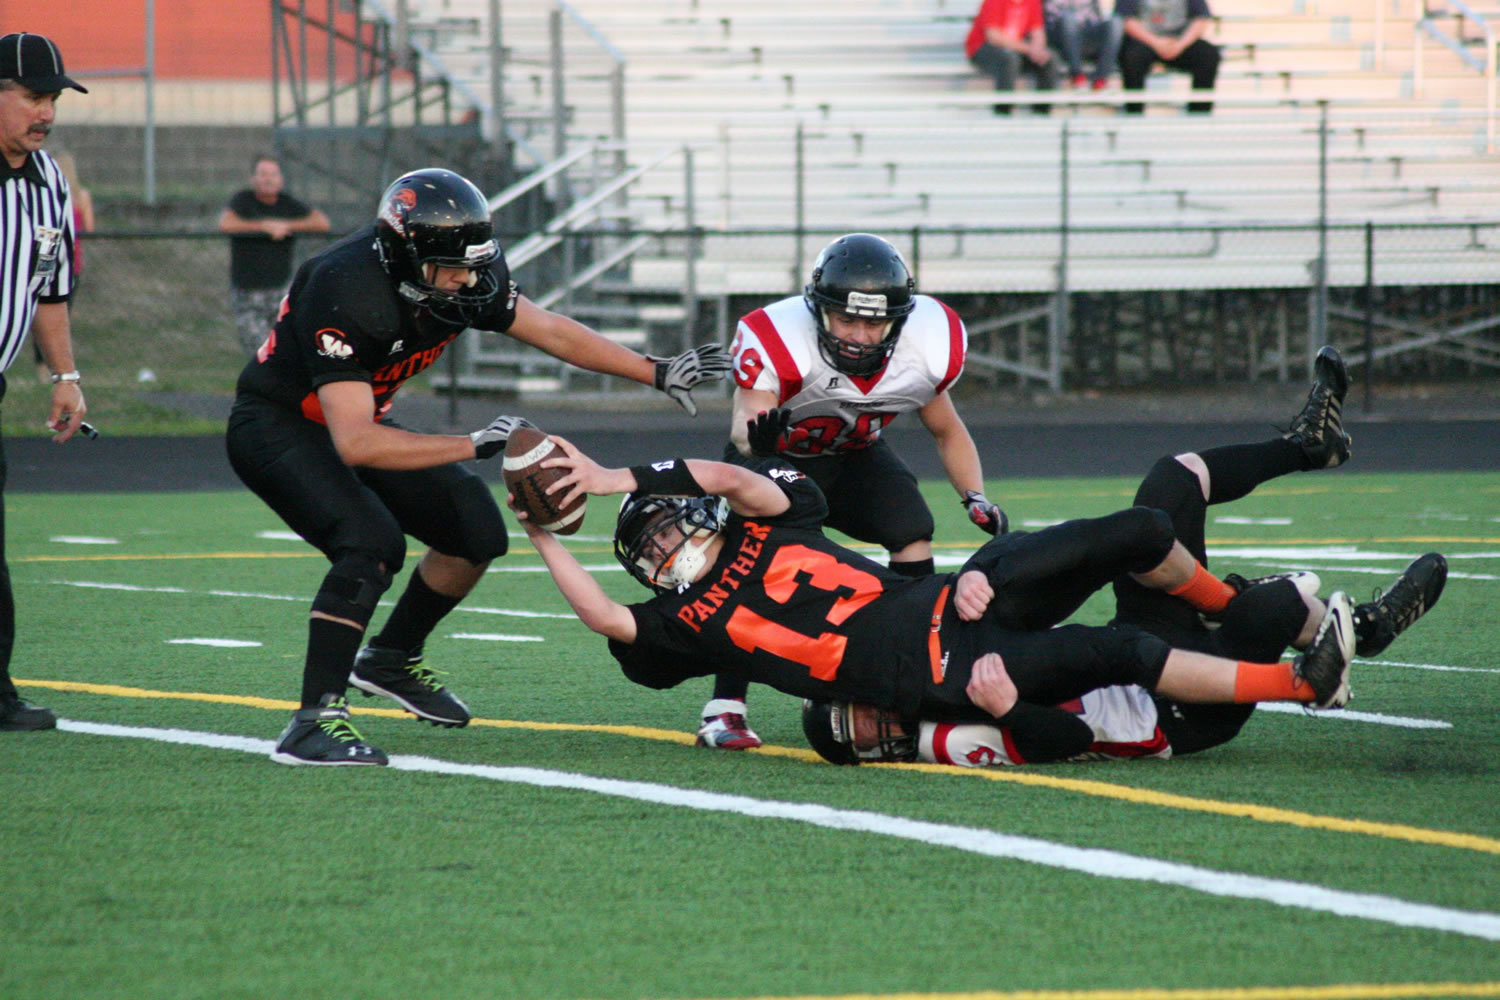 Brandon Casteel (13) gets the football across the goal line for a Washougal touchdown Friday, at Fishback Stadium.